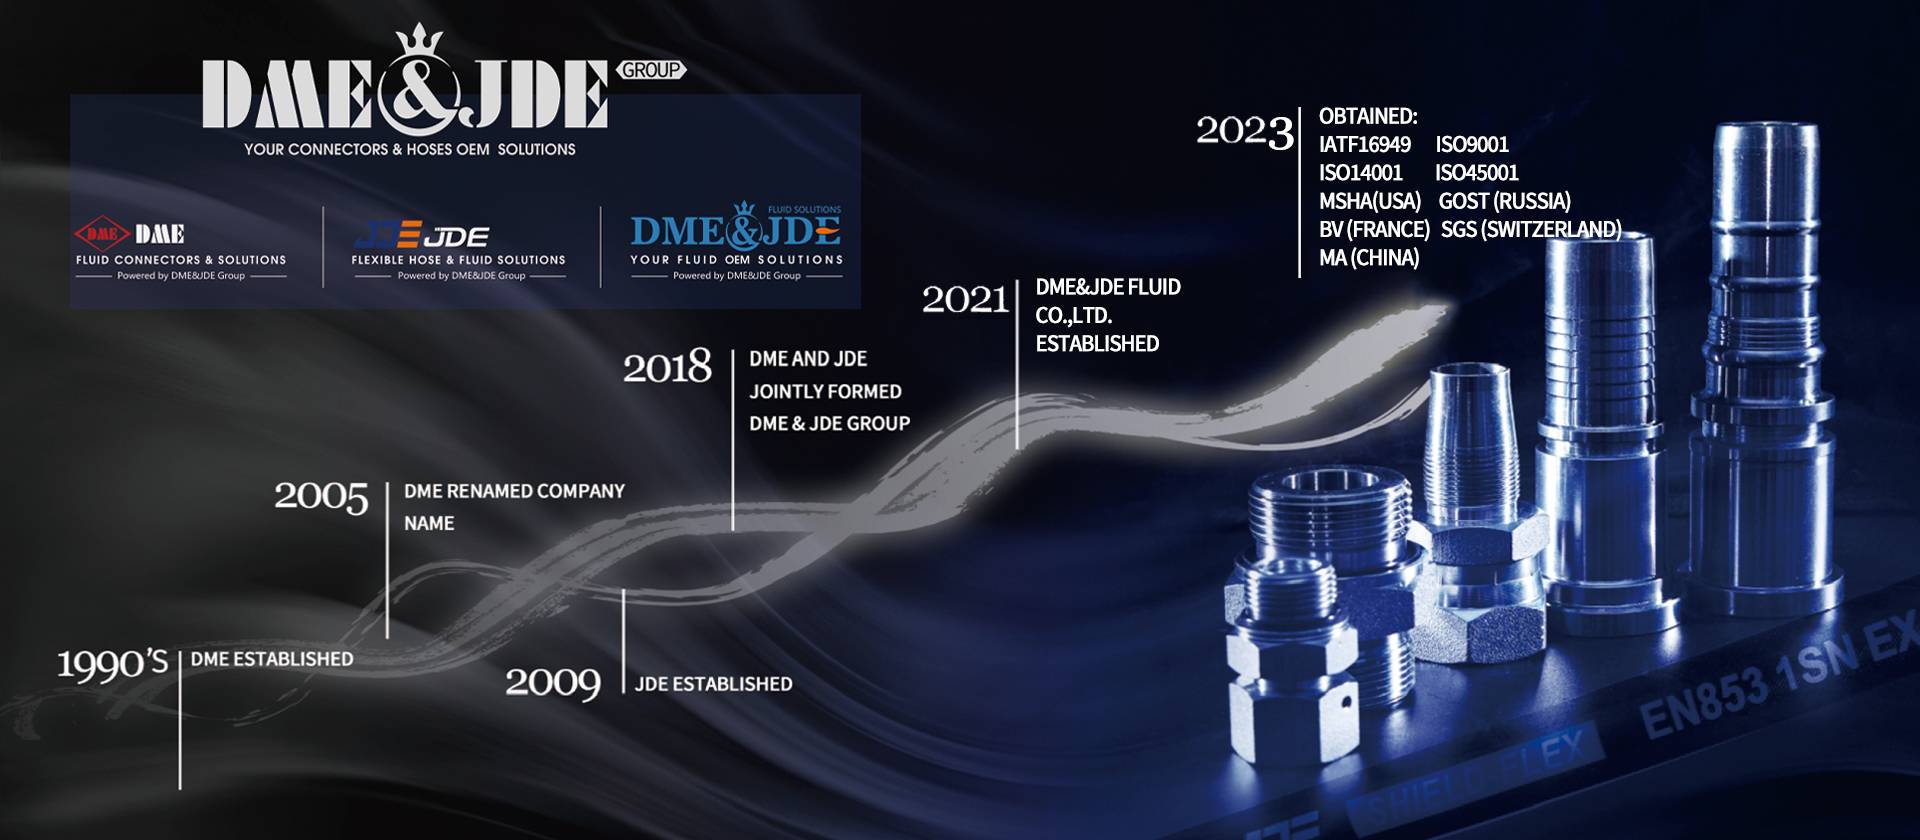 DME&JDE development milestones and Several connectors and hoses on the background.